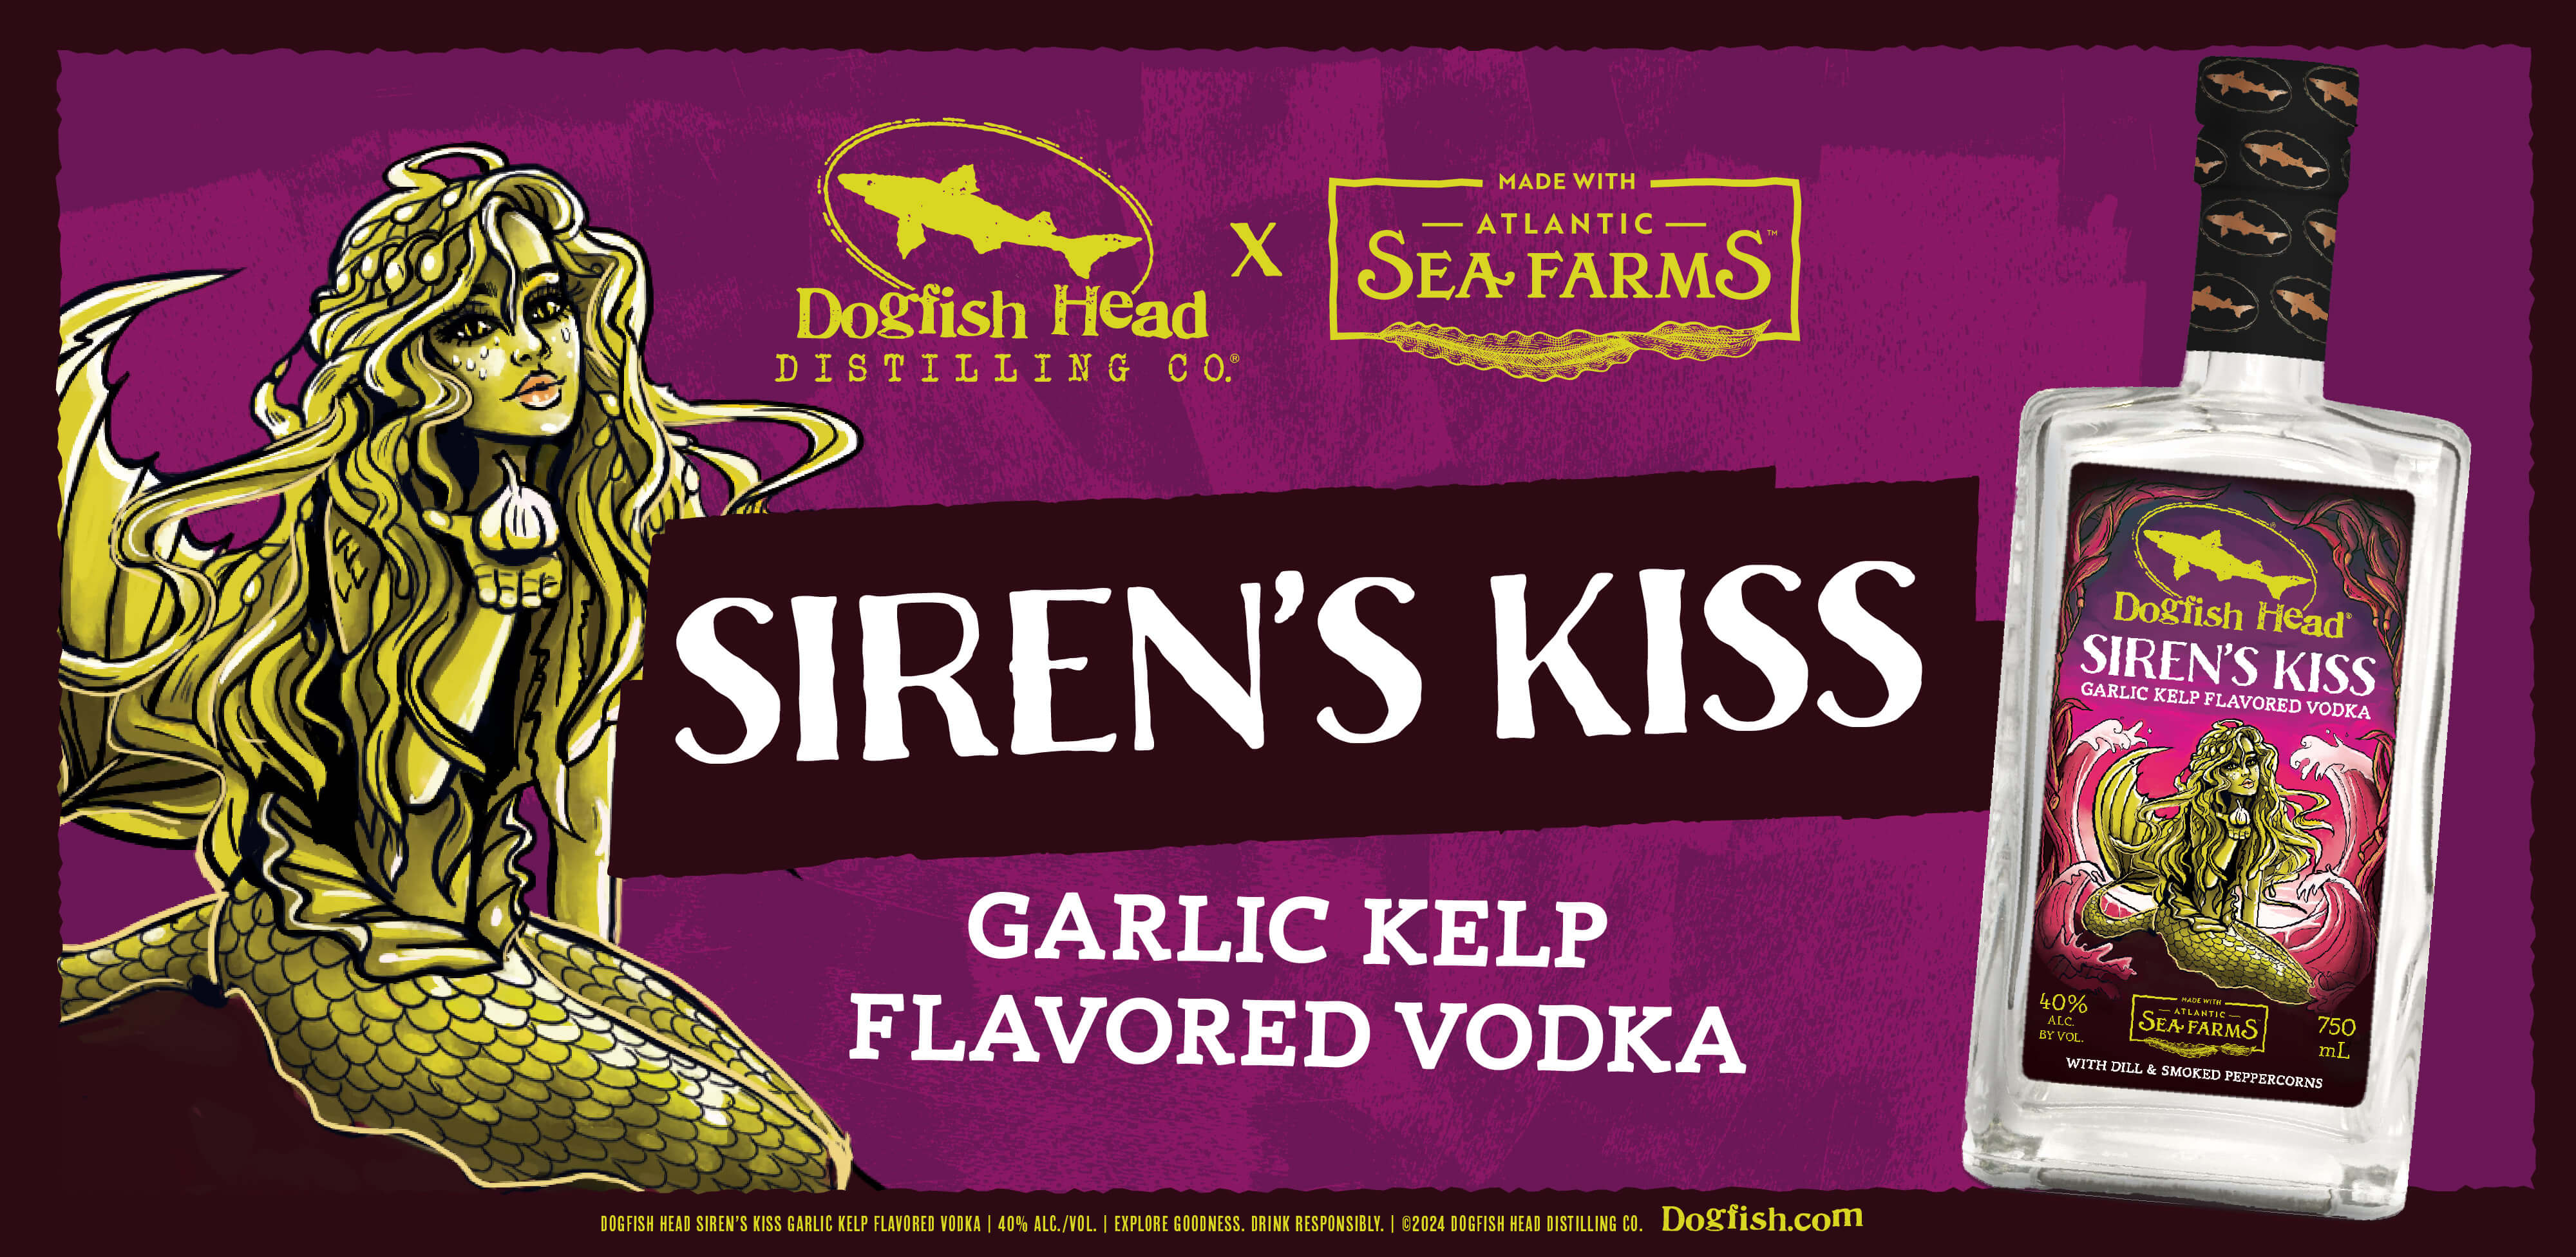 Siren's Kiss Kelp Flavored Vodka label and release with a mermaid made of seaweed